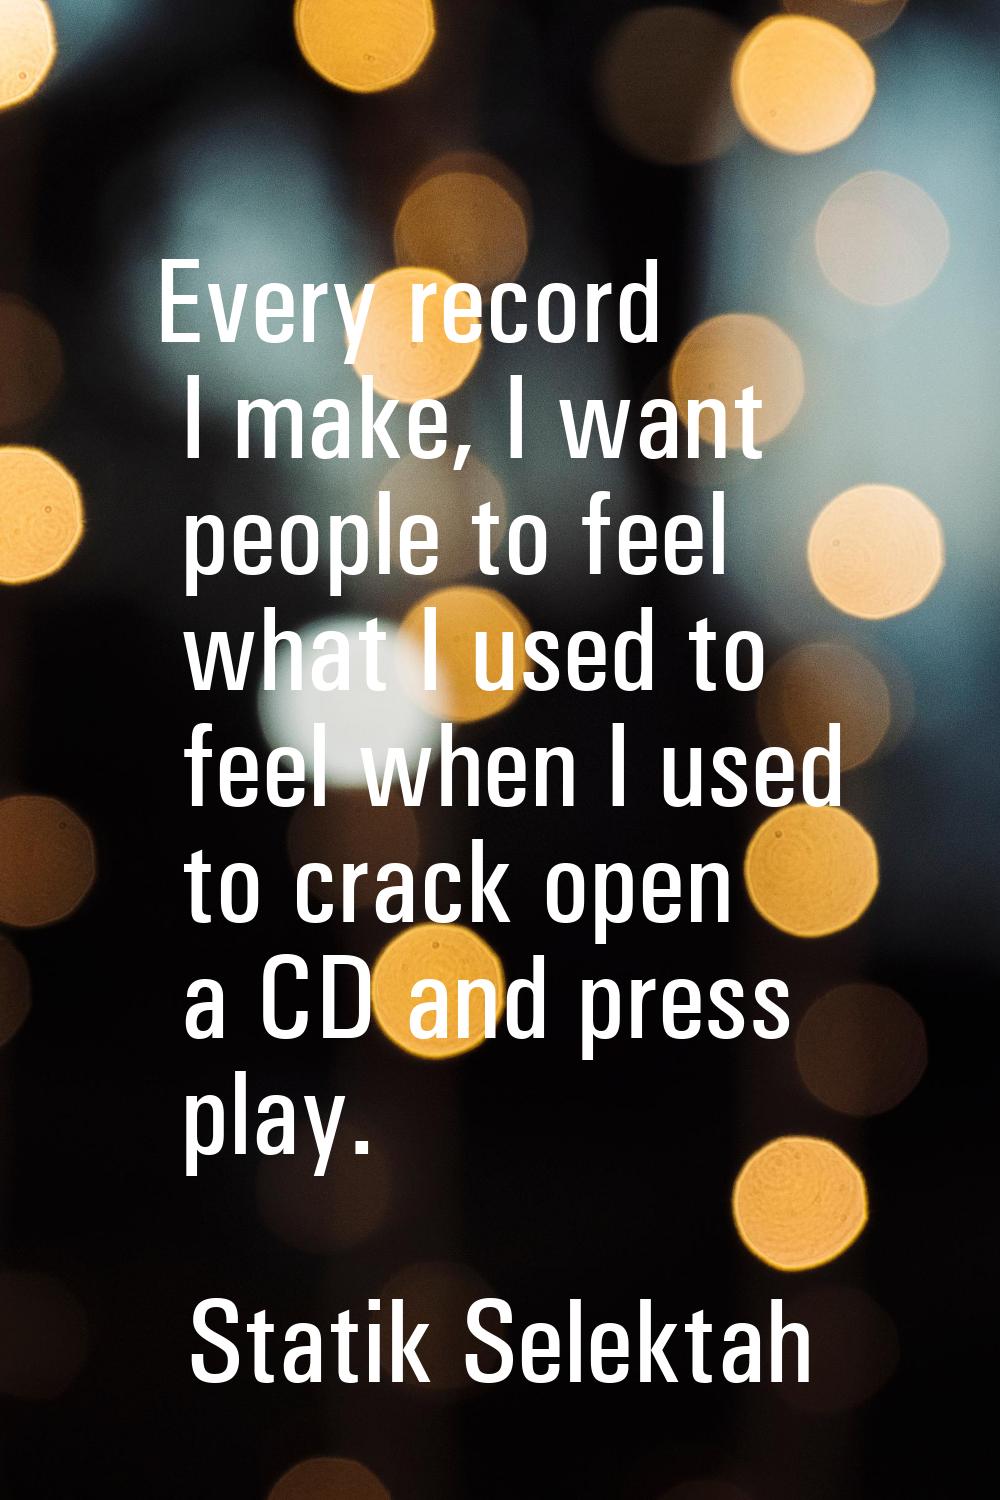 Every record I make, I want people to feel what I used to feel when I used to crack open a CD and p